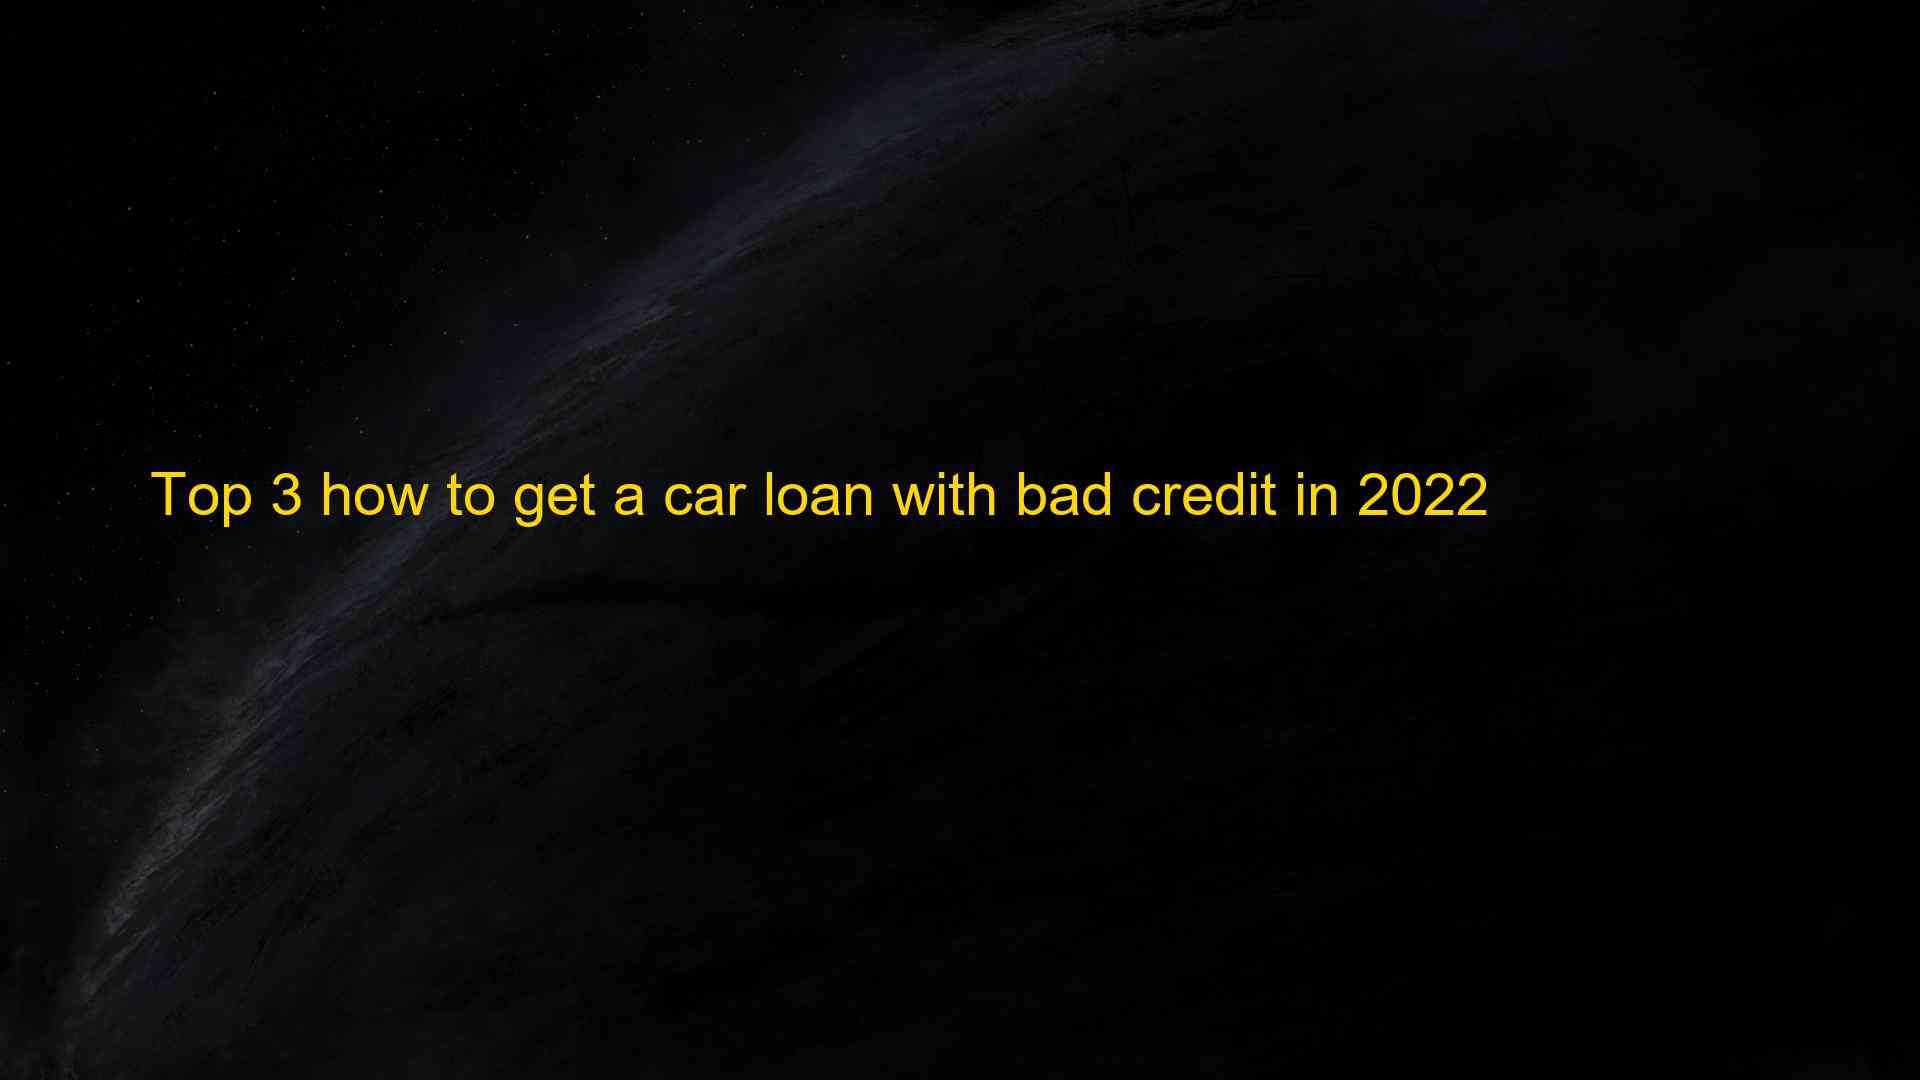 Top 3 how to get a car loan with bad credit in 2022 1659616126